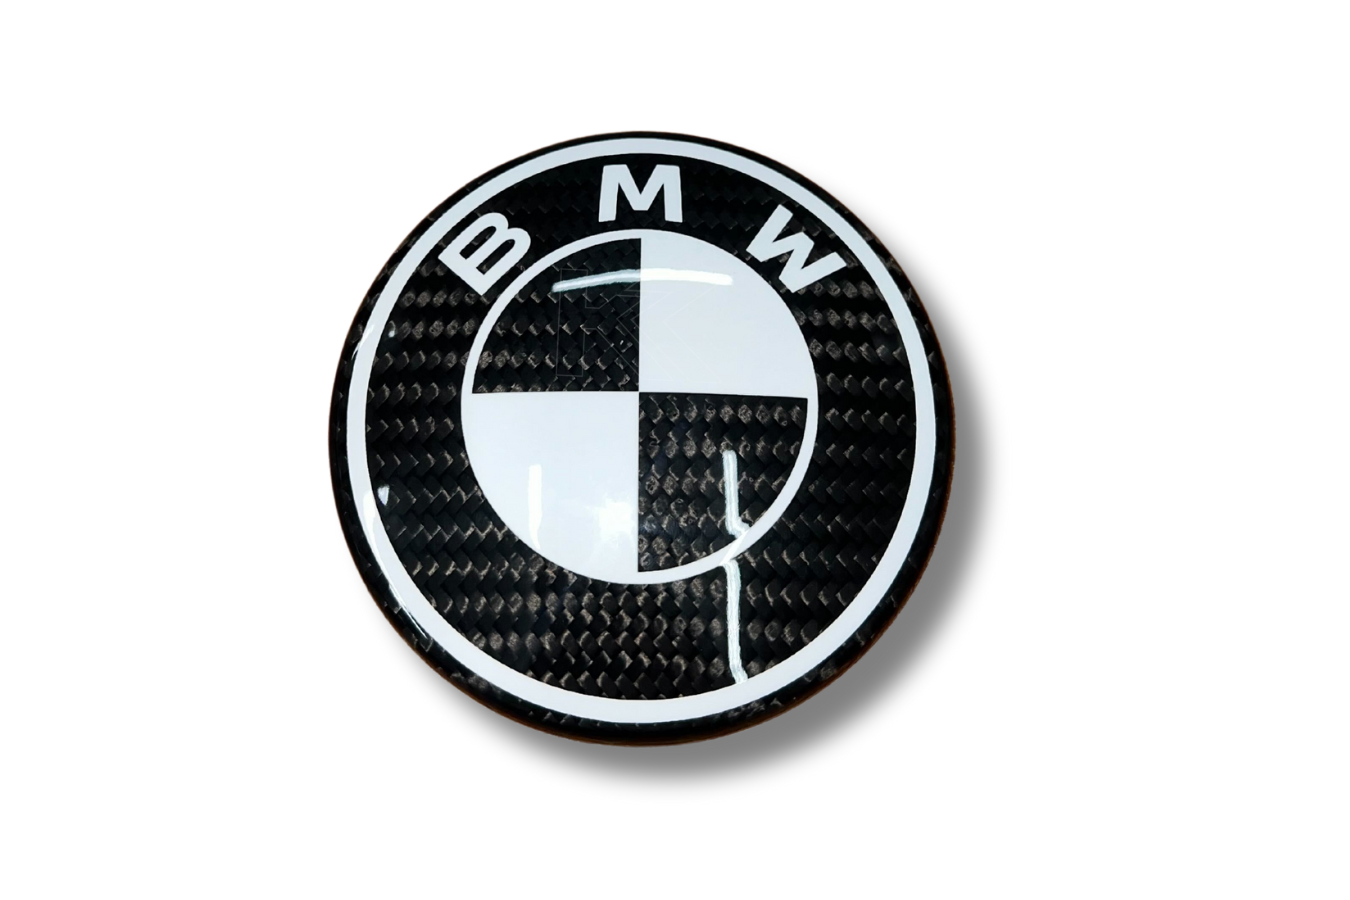 BMW Roundel Emblem Covers - Full Carbon Black and White Style